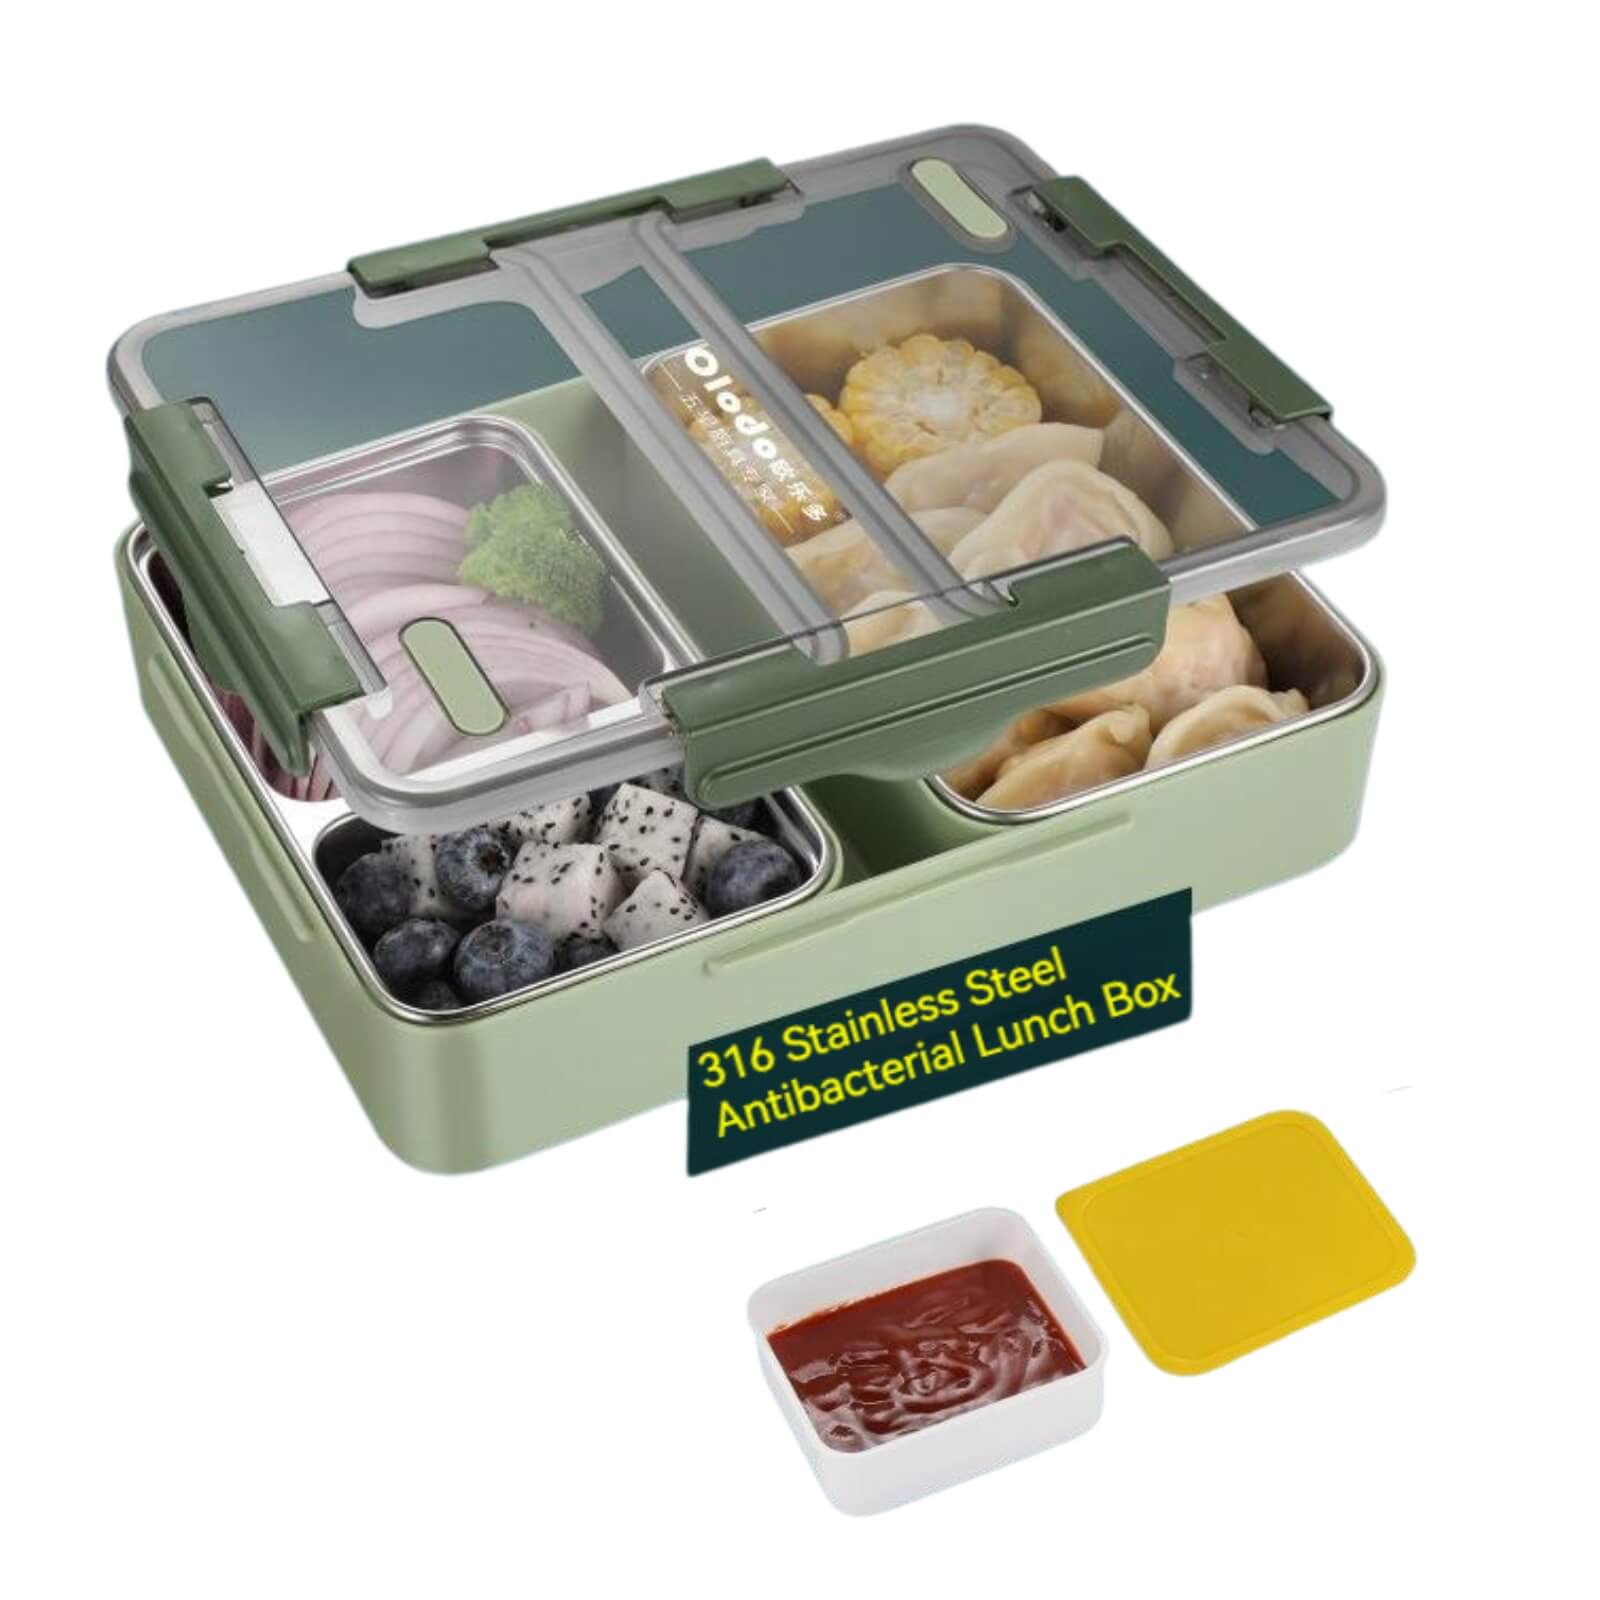 Green stainless lunch box nz